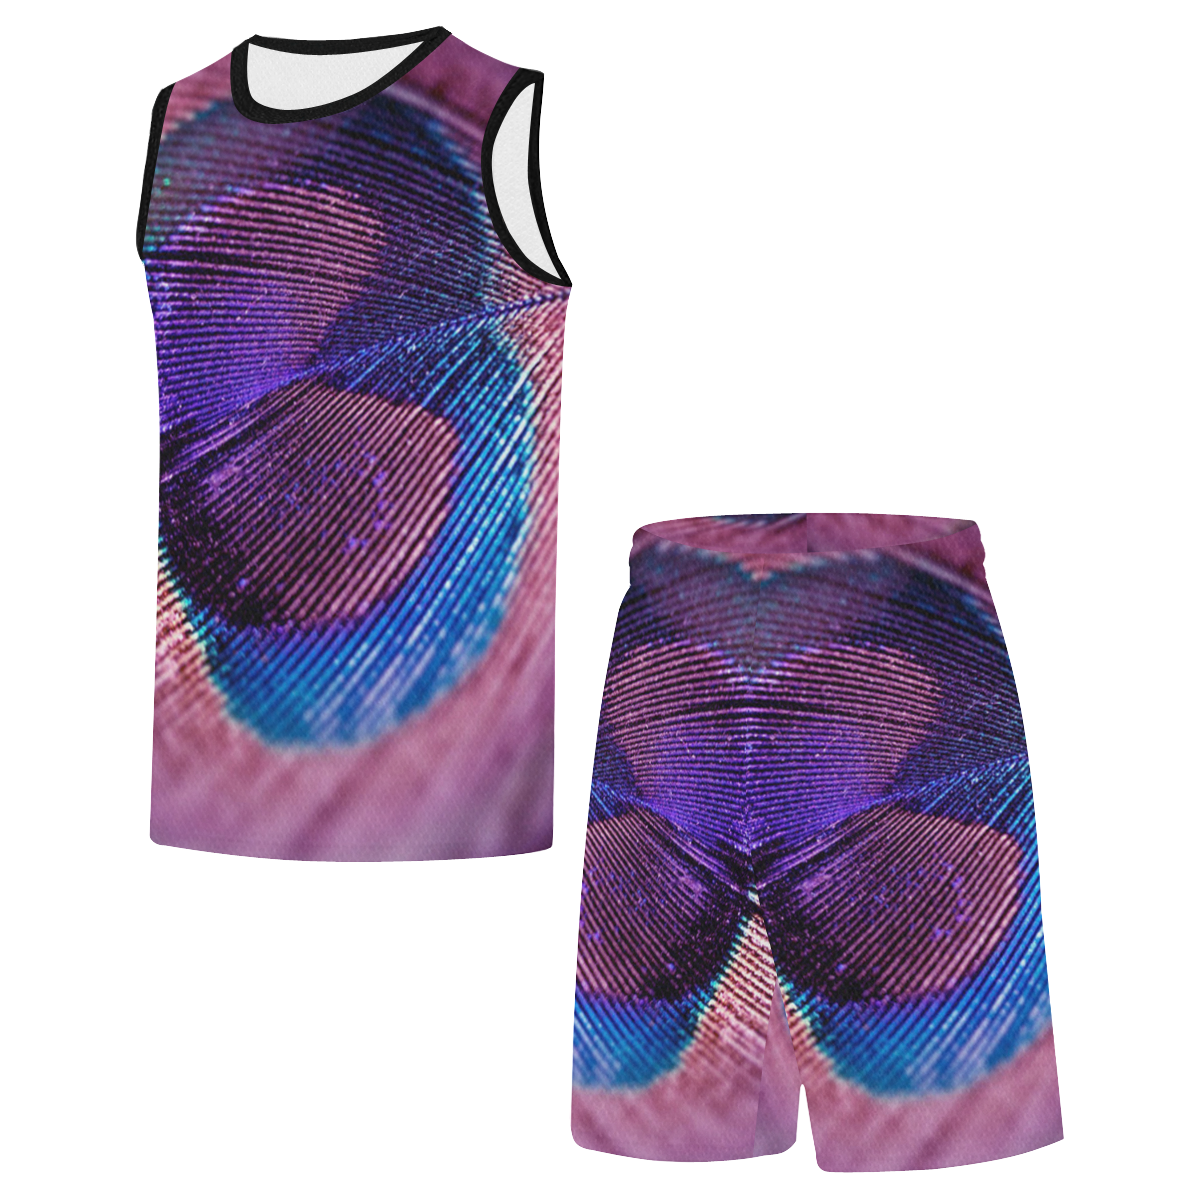 Purple Peacock Feather All Over Print Basketball Uniform